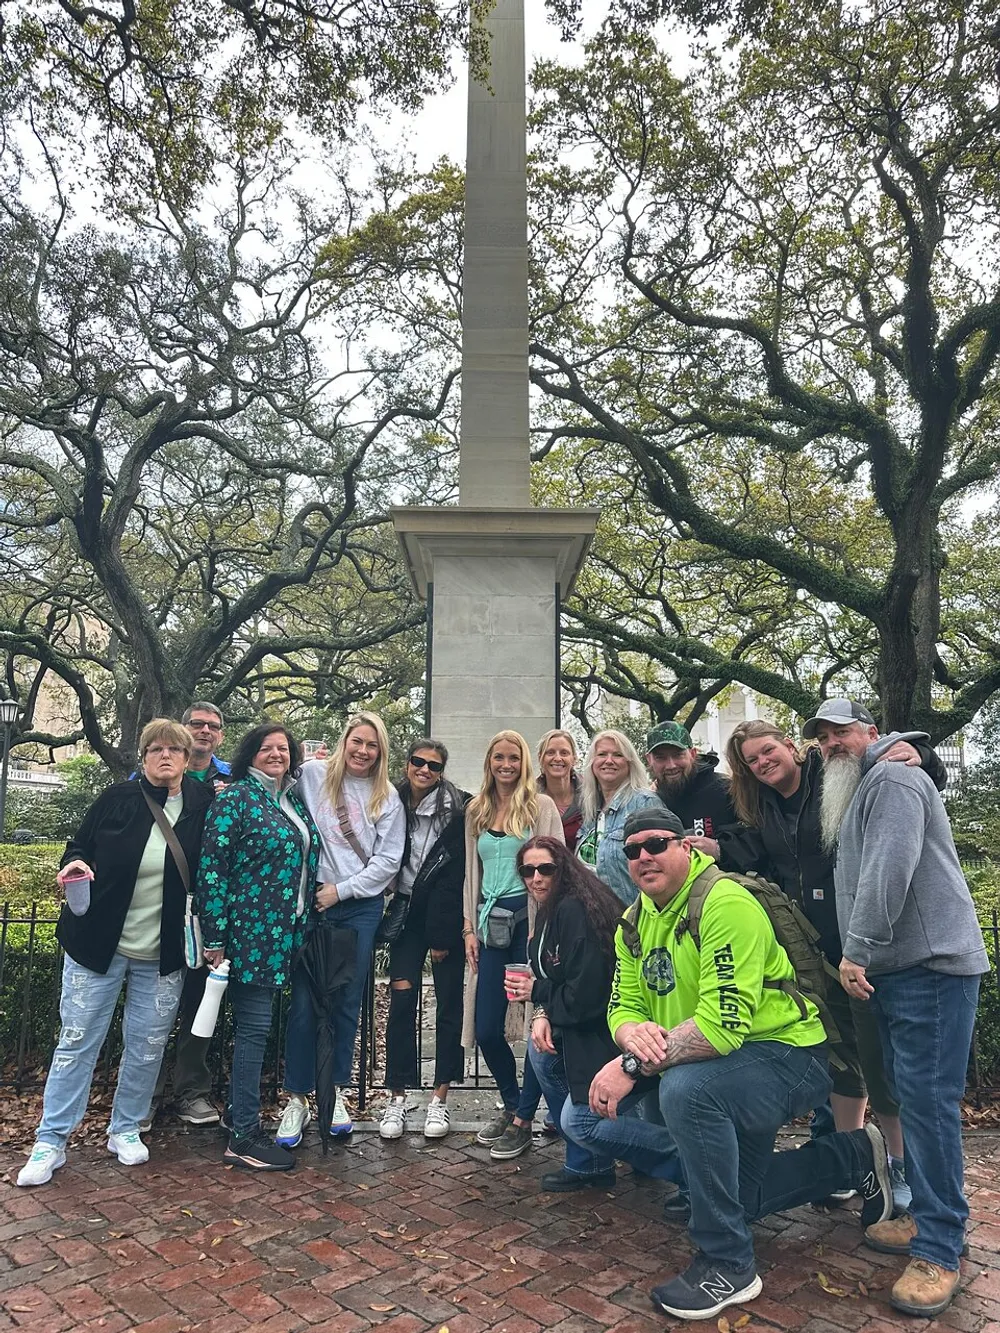 A diverse group of people posing for a photo in a park with a monument and sprawling oak trees in the background